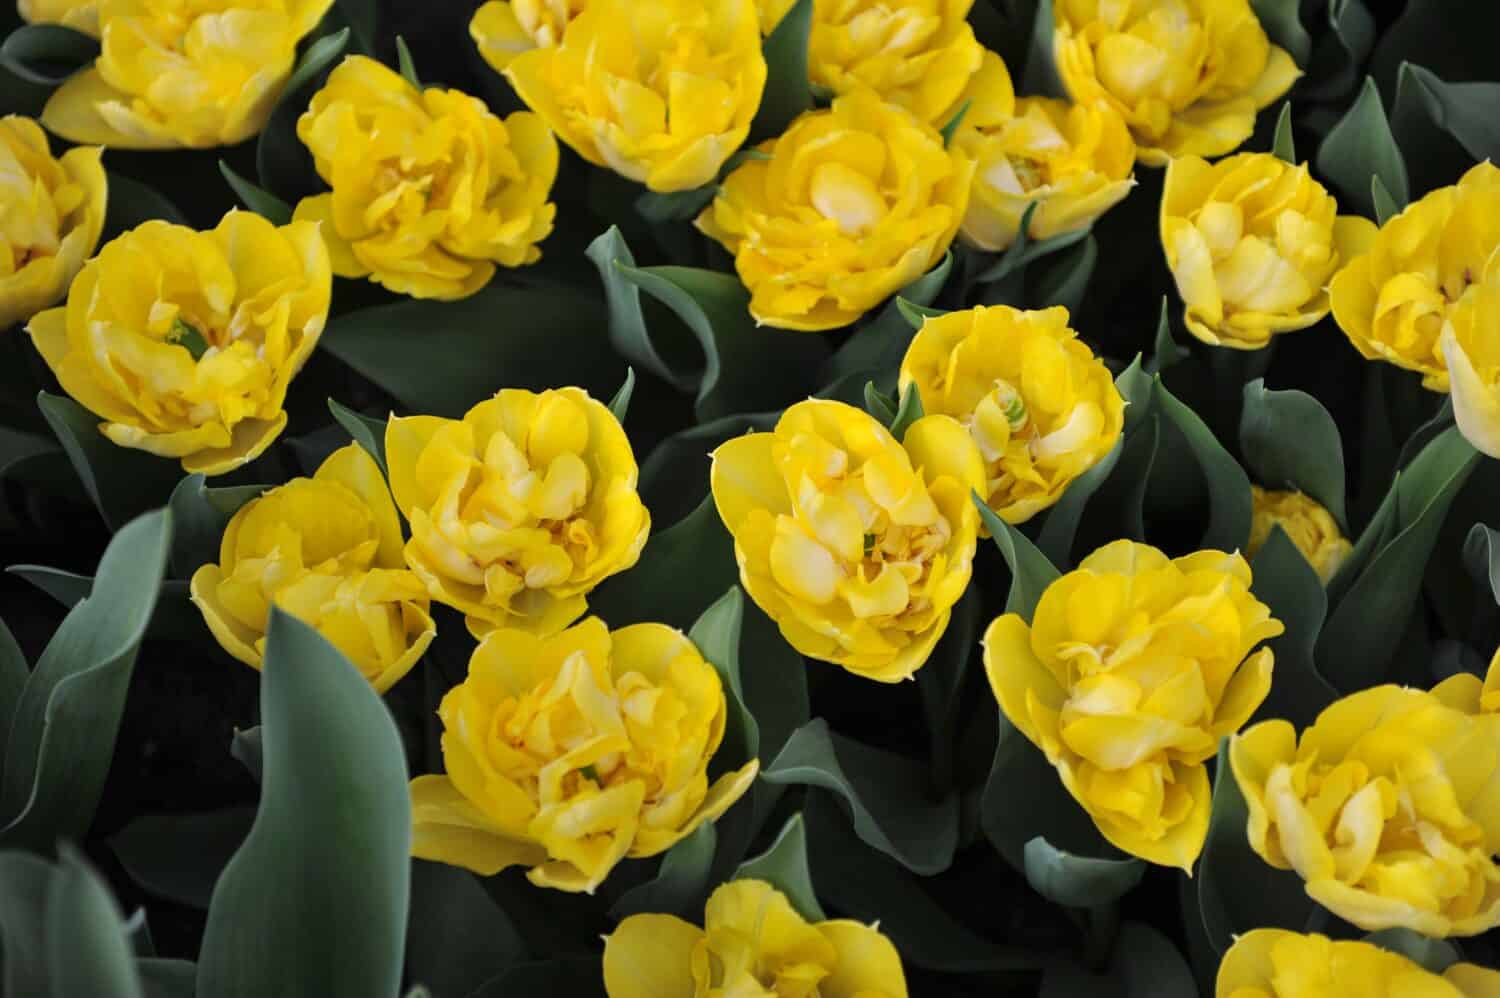 Yellow peony-flowered Double Early tulips (Tulipa) Secret Perfume bloom in a garden in March